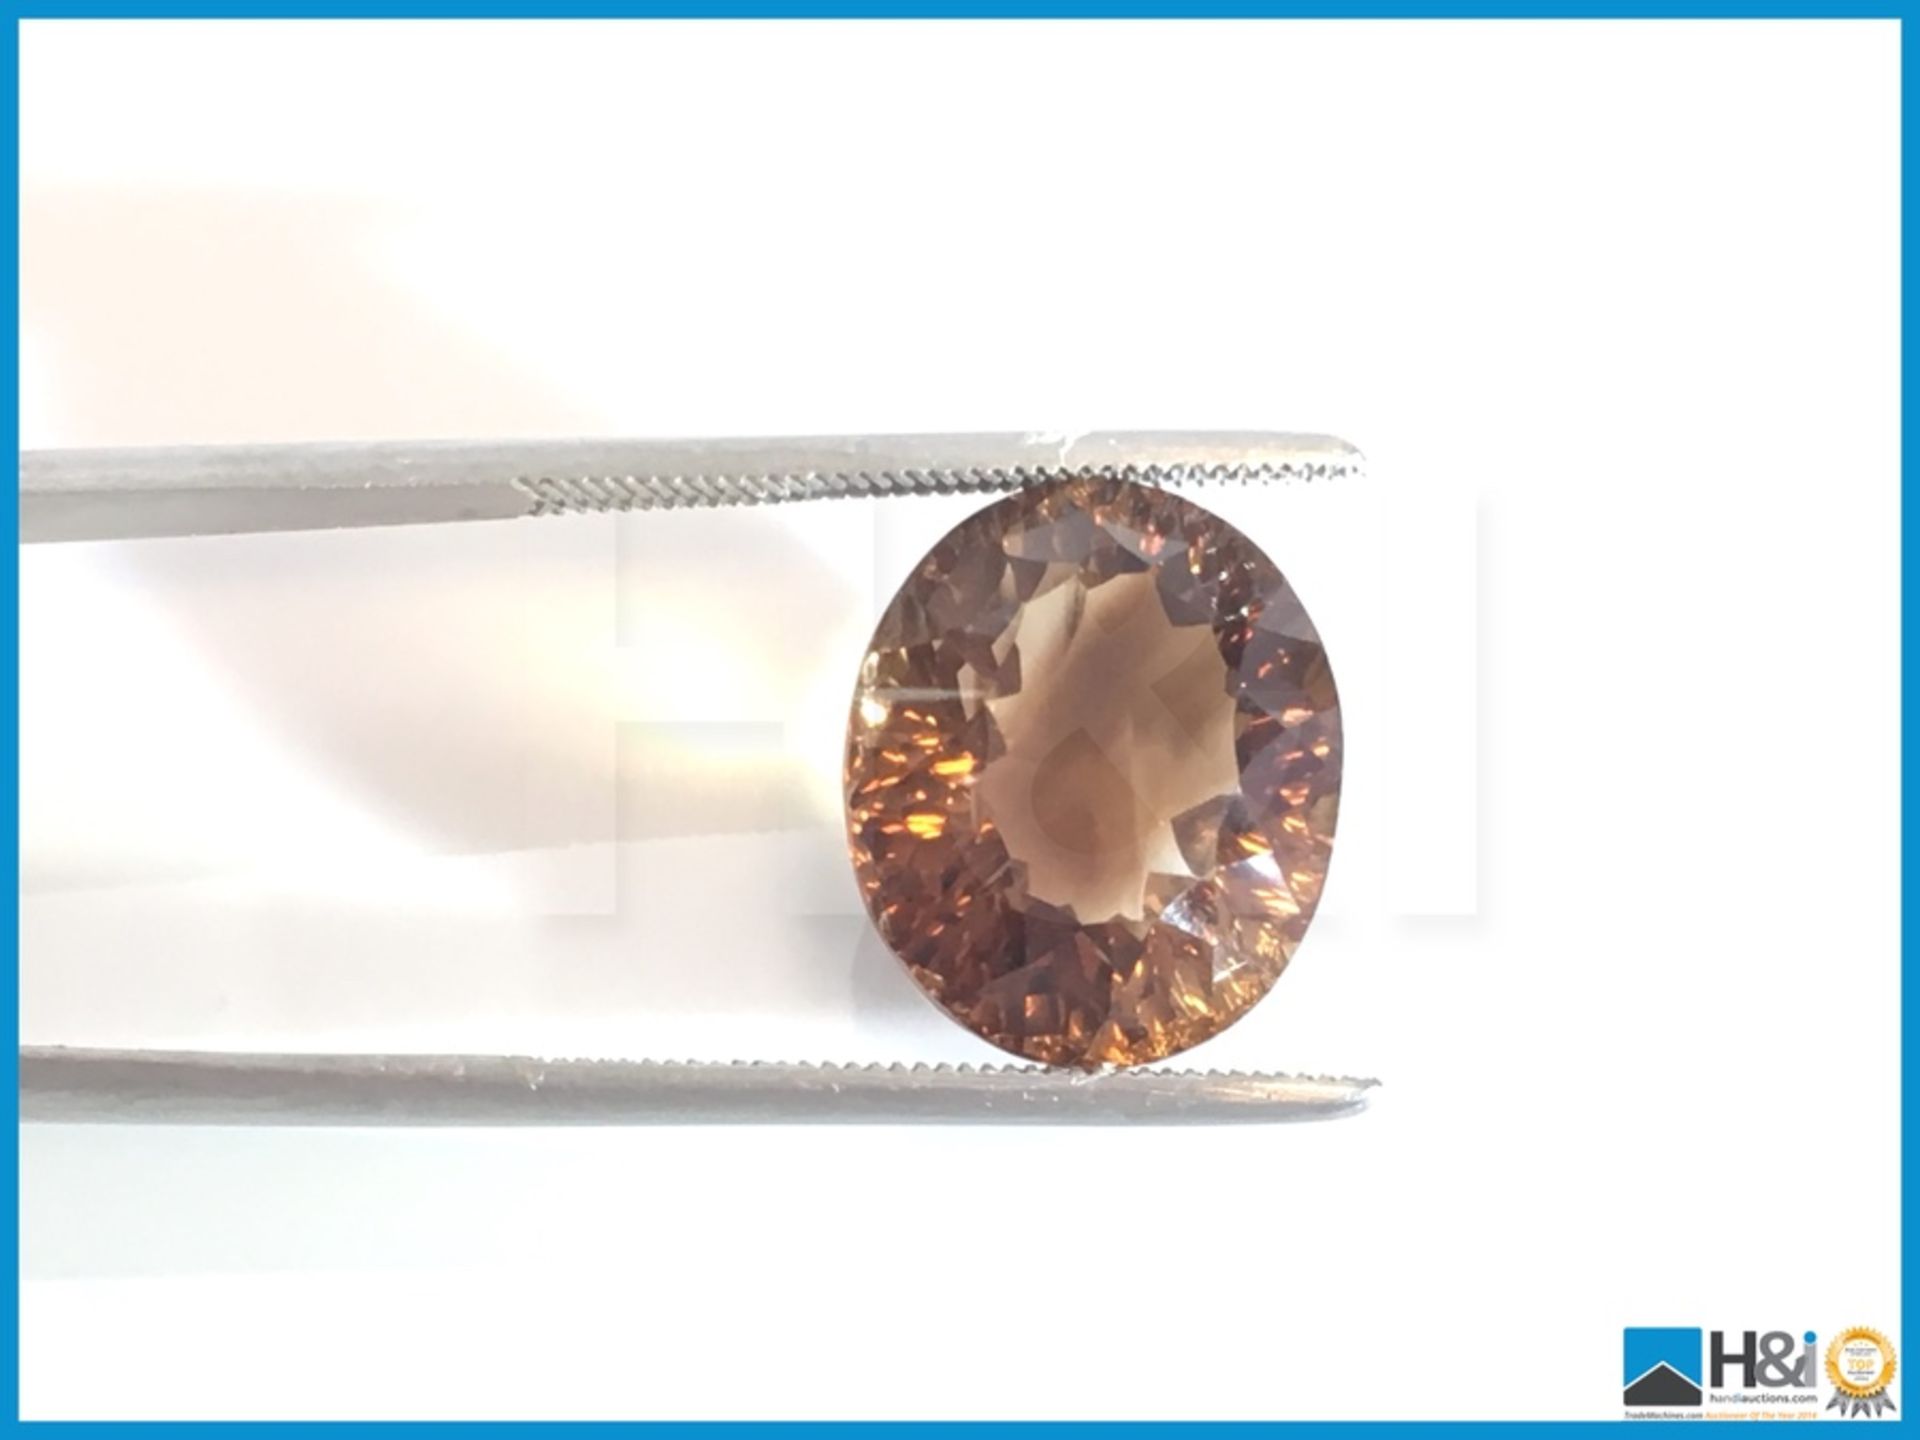 13.56ct Natural Topaz.Oval Facetted Cut in Yellowish Brown. Transparrent with GIL Certificate 14. - Bild 3 aus 4